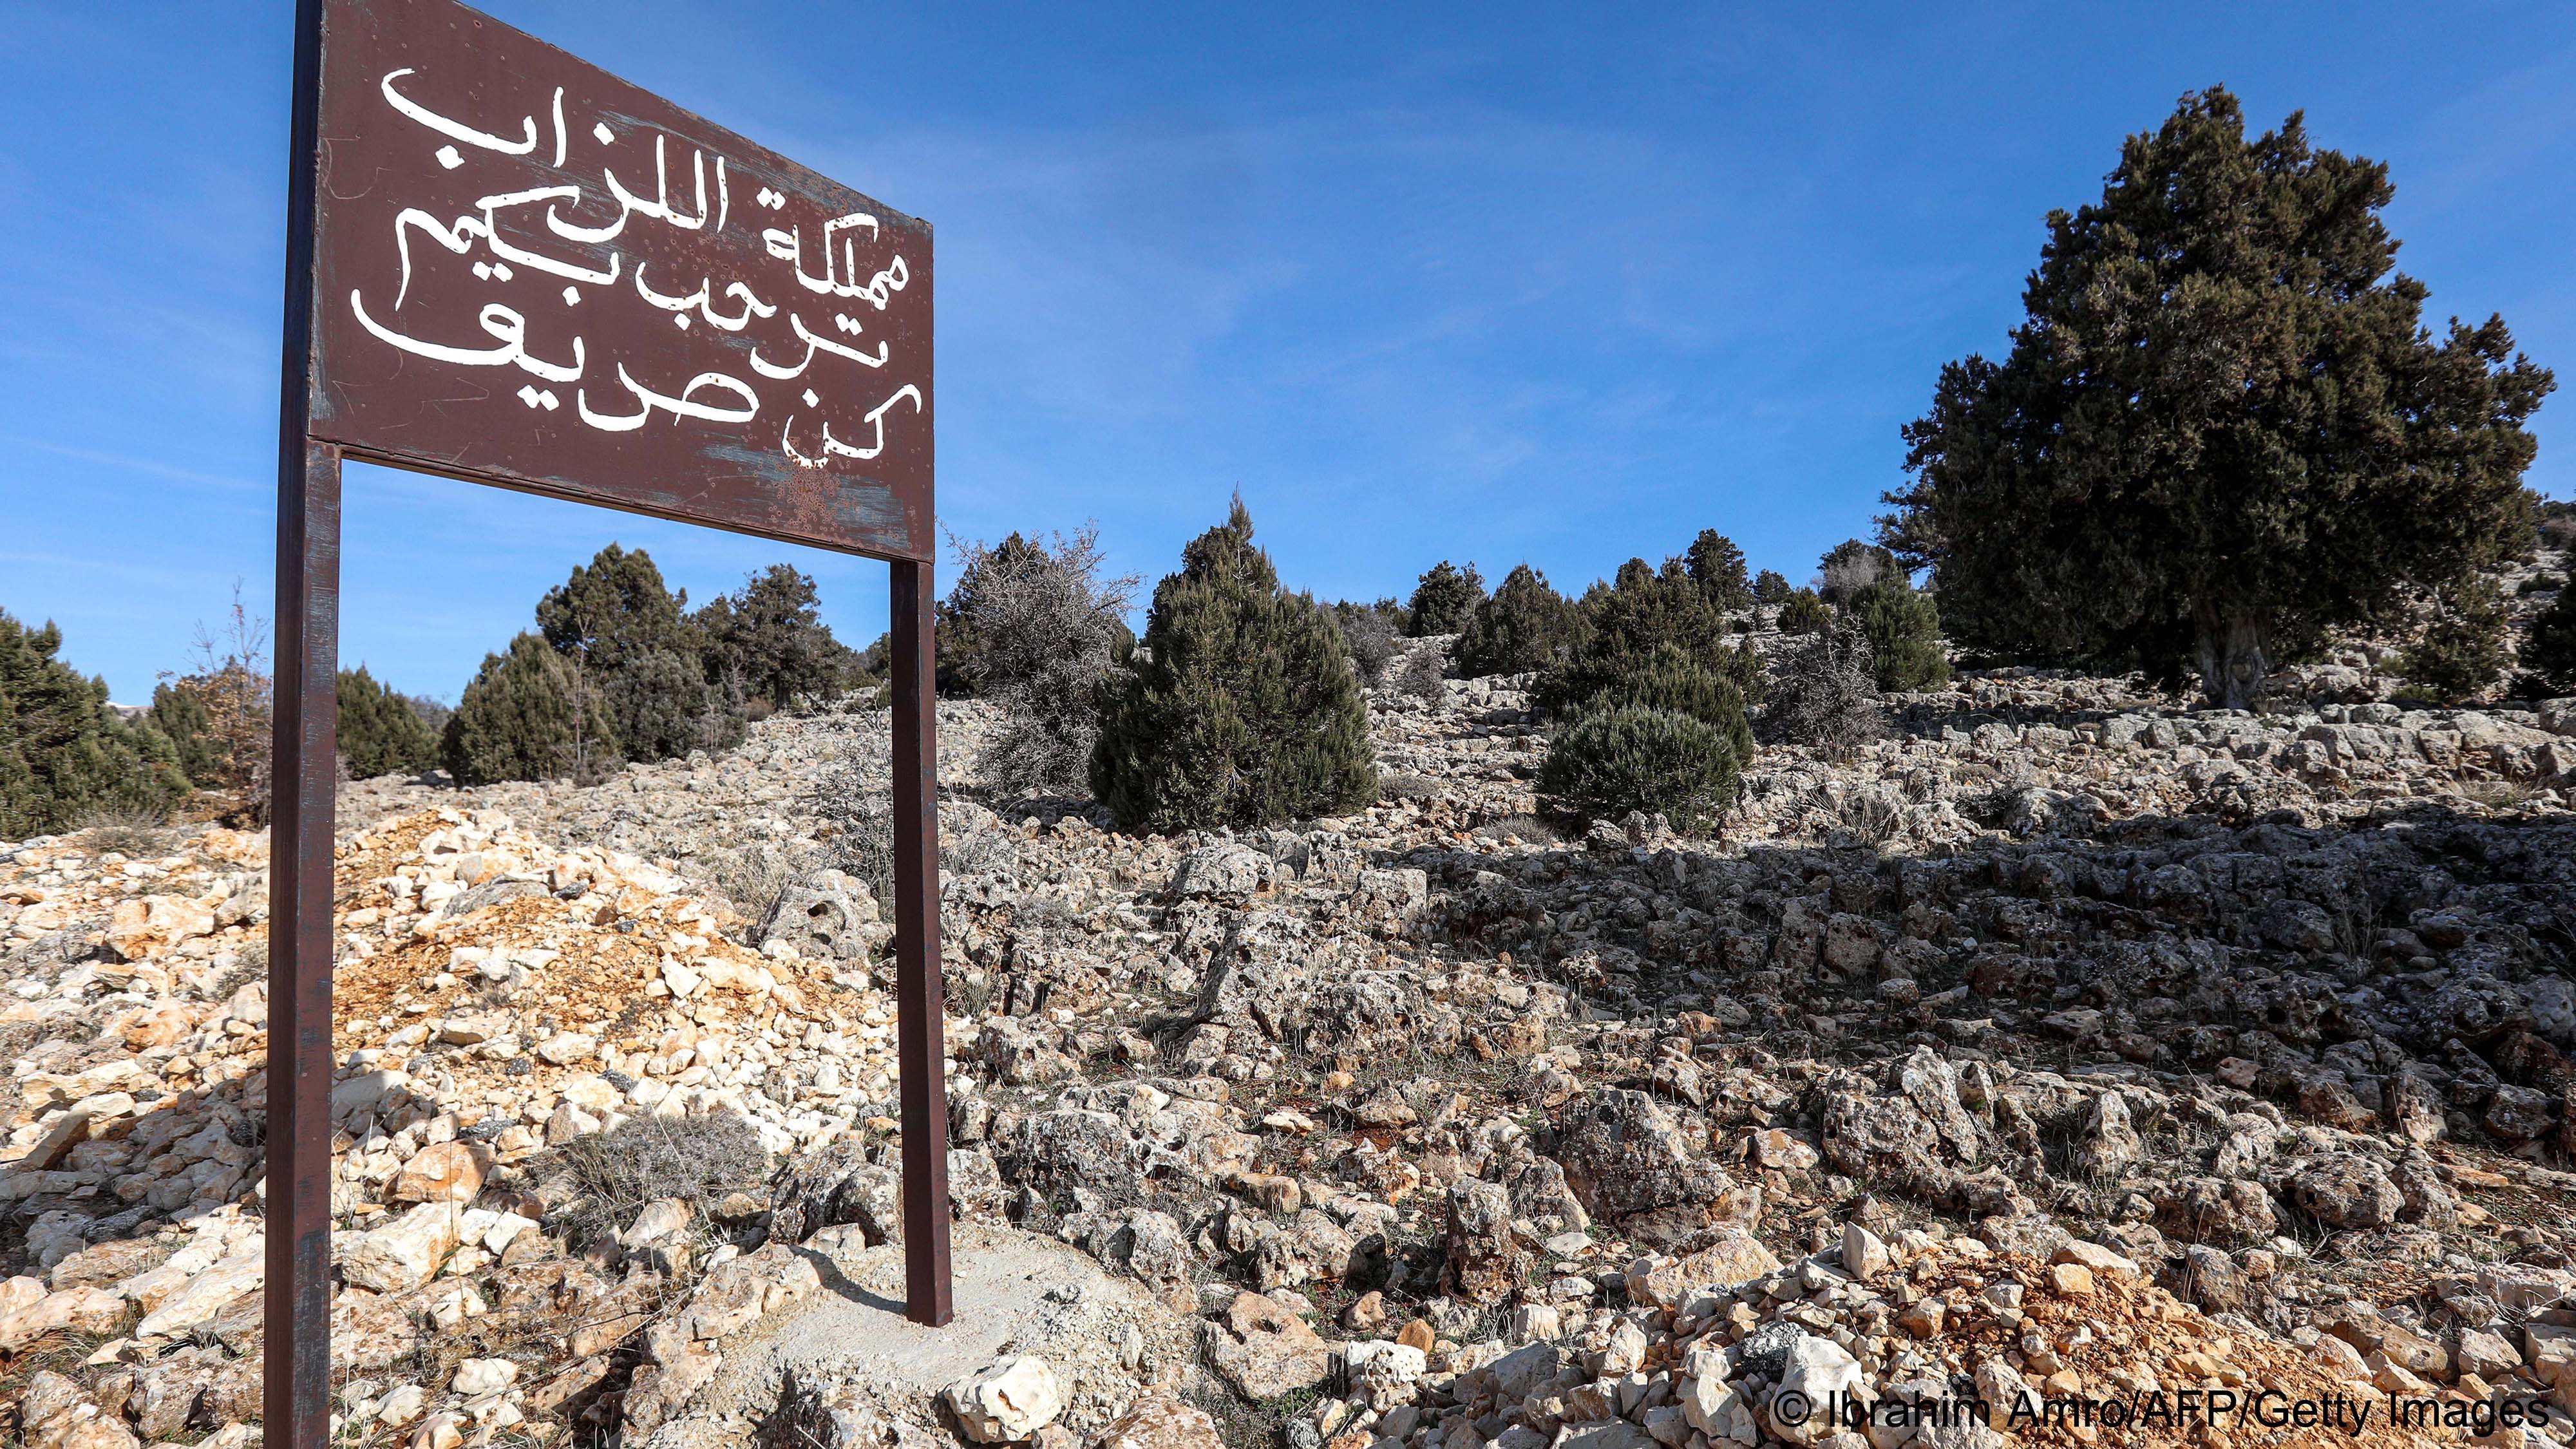 Sign in Arabic in front of a hillside planted with trees (image: Ibrahim AMRO/AFP)